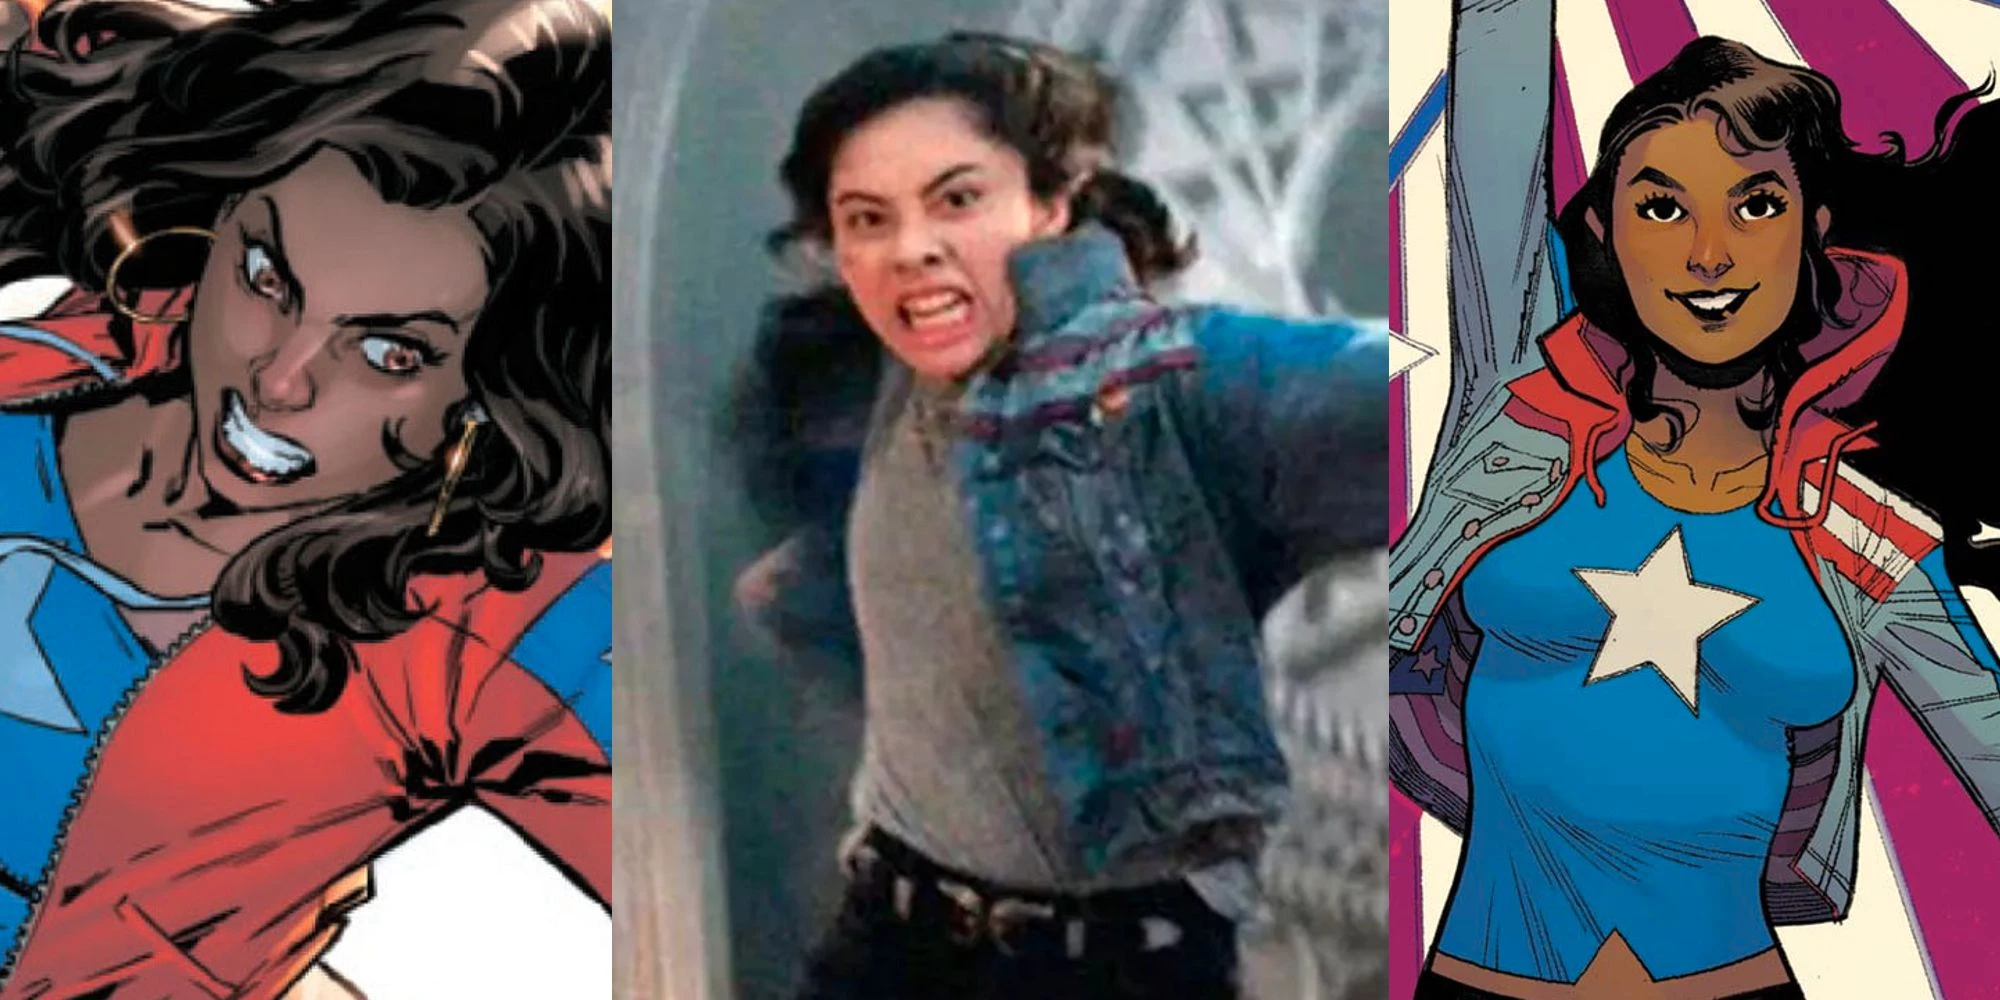 Top 10 facts you need to know about America Chavez